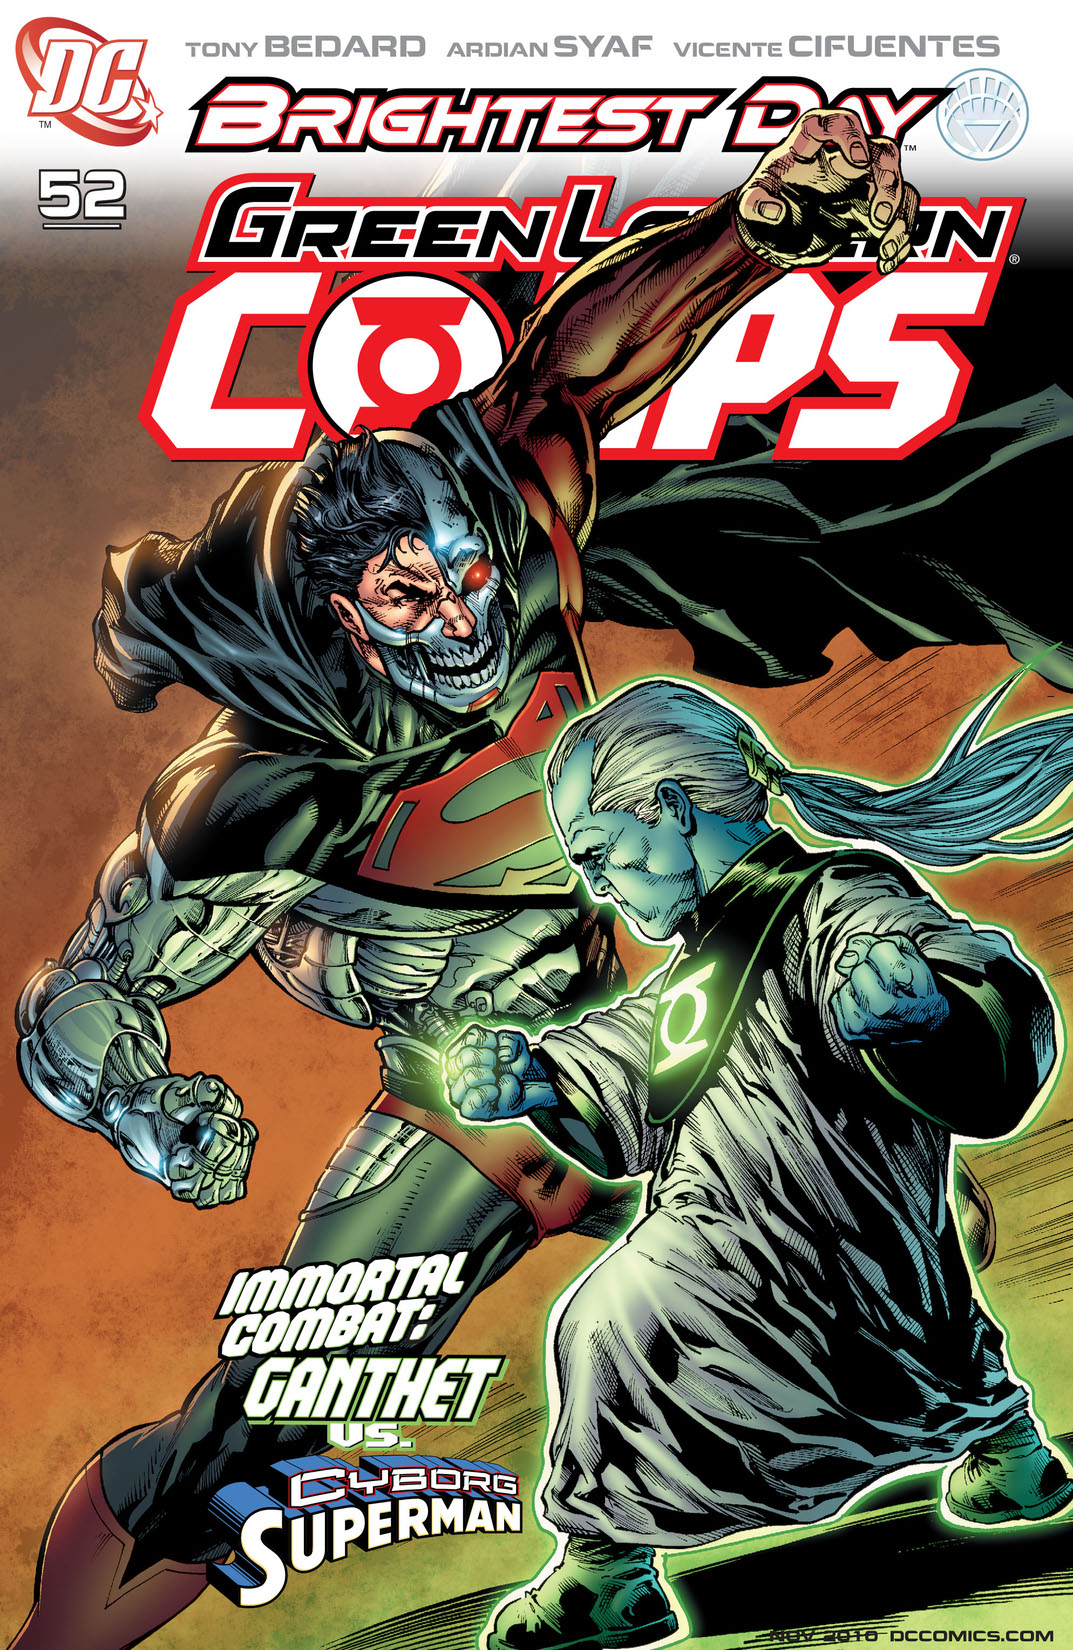 Green Lantern Corps (2006-) #52 preview images